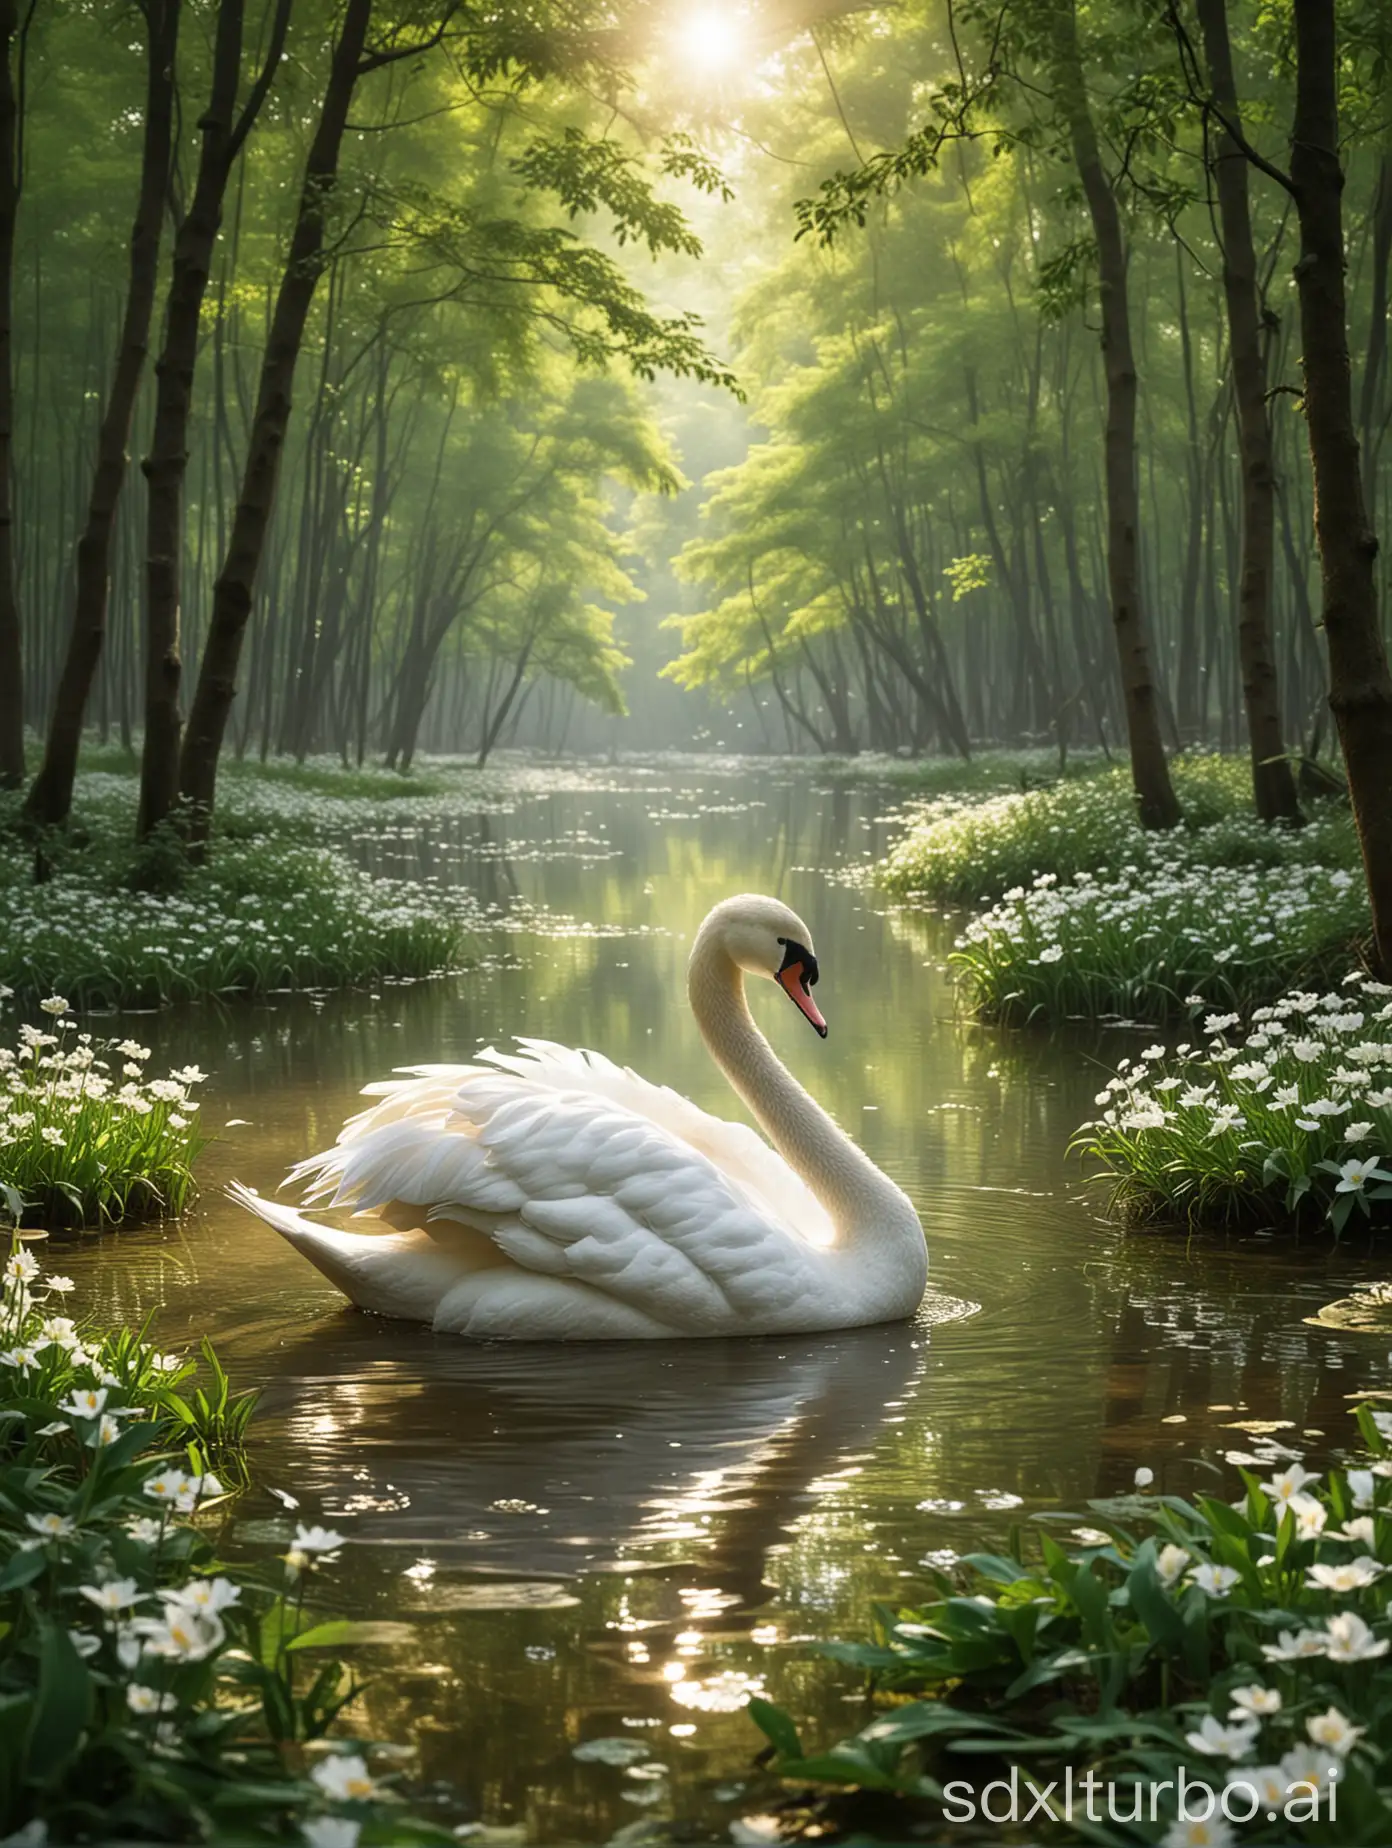  "Happy swan in the forest during daytime"

Note: The original sentence seems to be a mixture of Chinese and non-English words (i.e., "white day," which is an uncommon usage in English). I have translated it as literally as possible, understanding that there might be some cultural or linguistic nuances lost in the translation process.